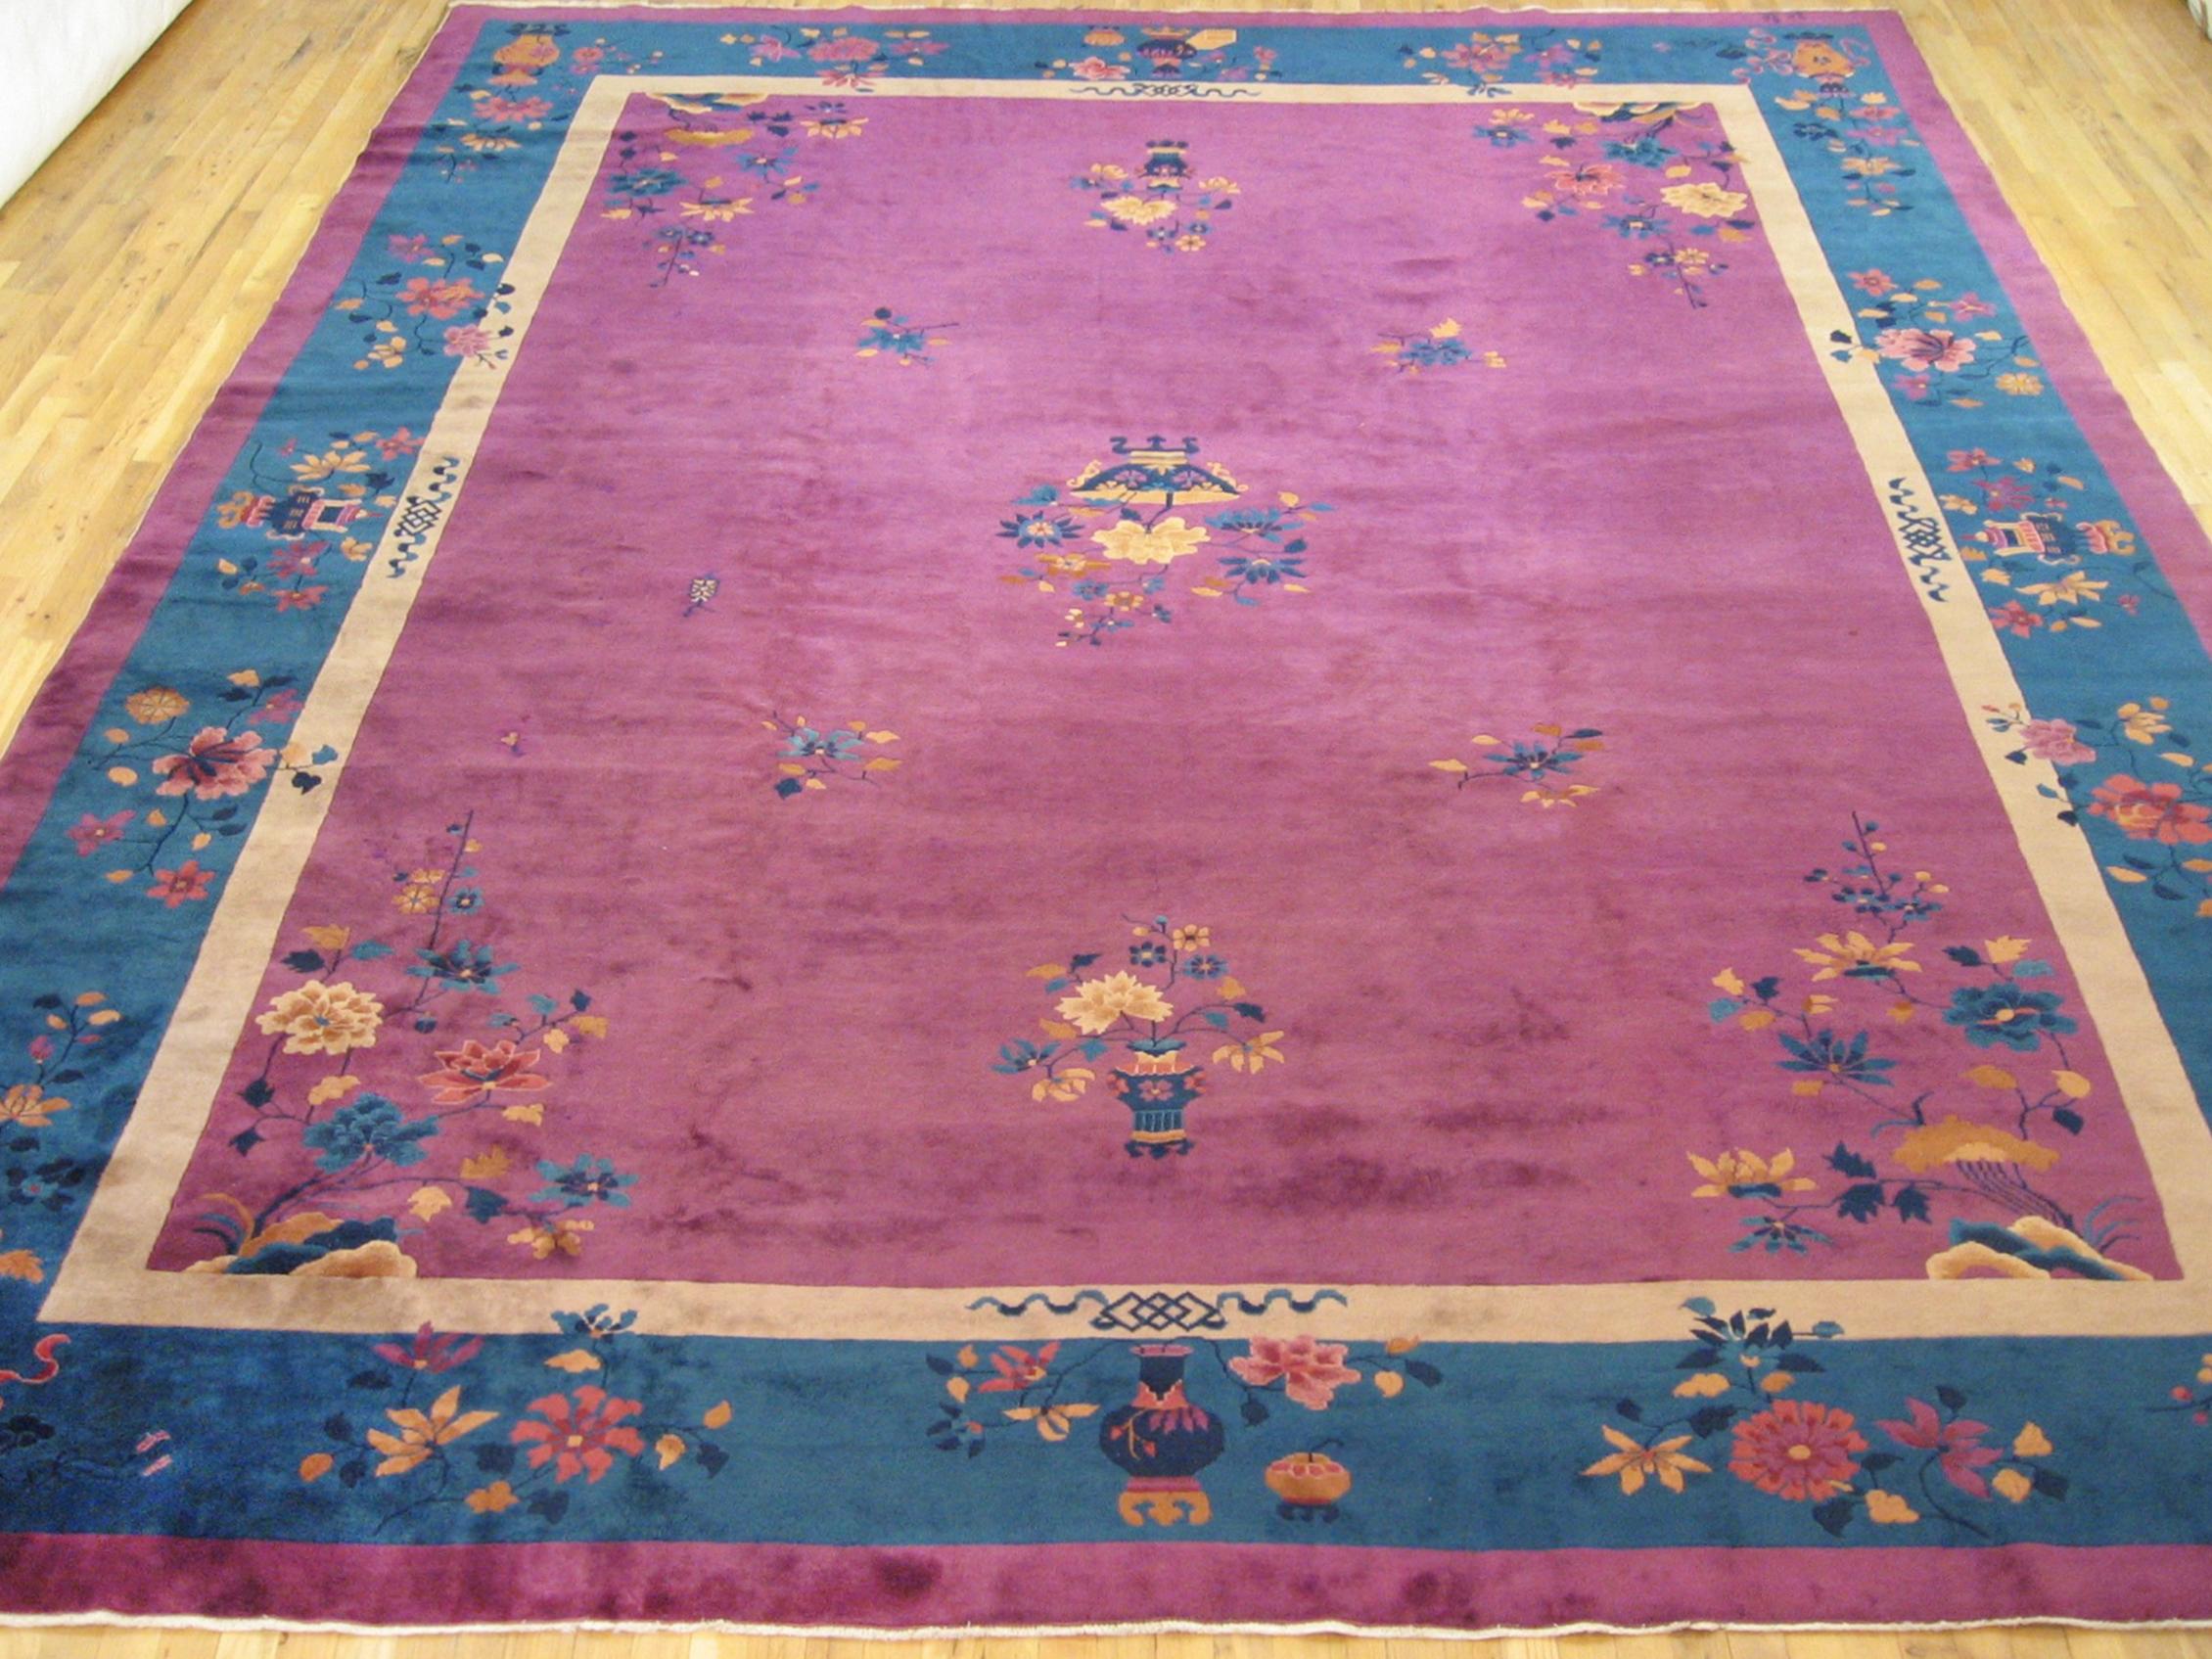 Antique Chinese Art deco rug, room size, circa 1920.

A one-of-a-kind antique Chinese Mandarin oriental carpet, hand-knotted with medium thickness wool pile. This beautiful rug features art deco motifs allover a large purple red open field, with a